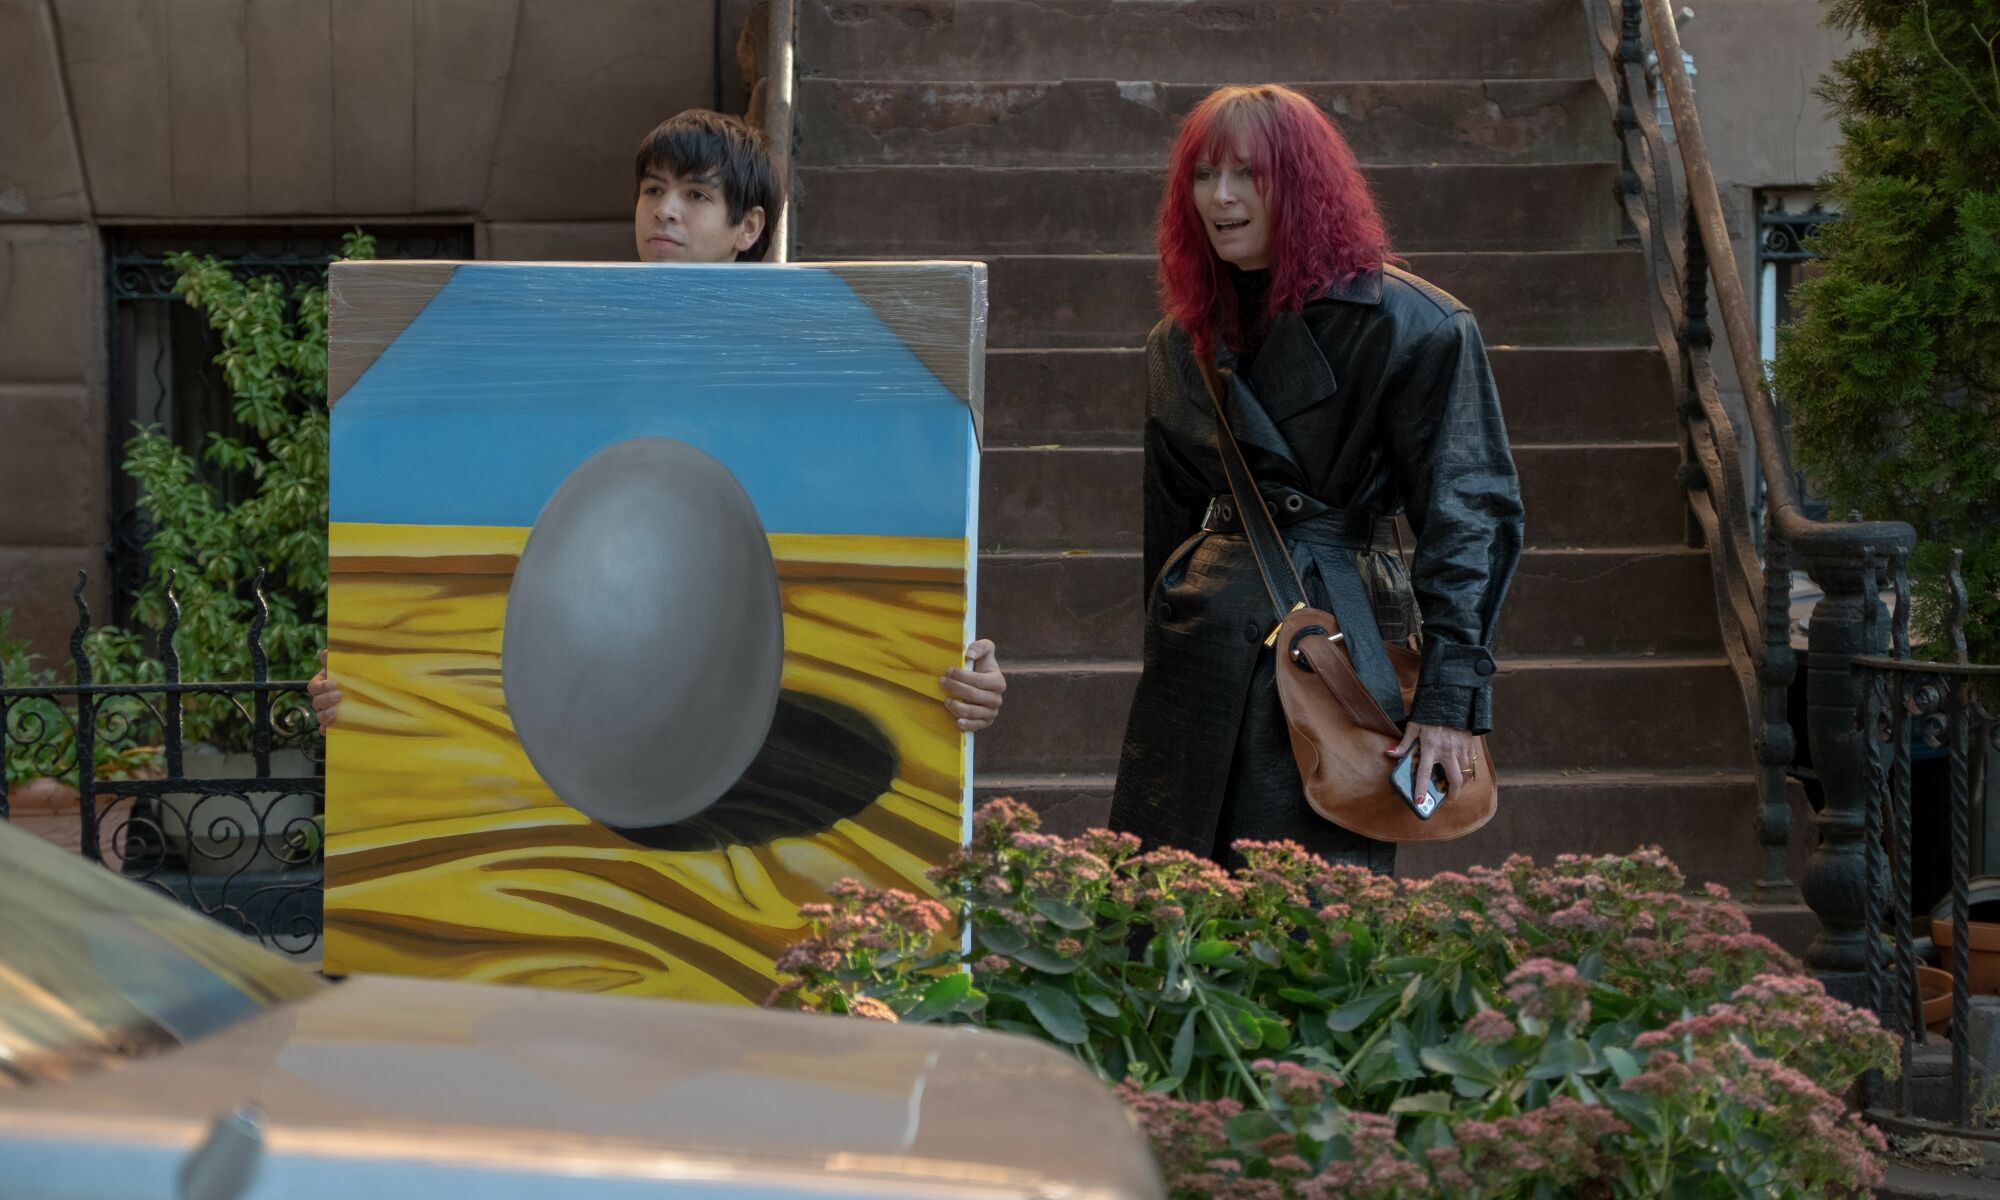 Tilda Swinton and Julio Torres with "Blue Egg on Yellow Satin" in "Problemista."